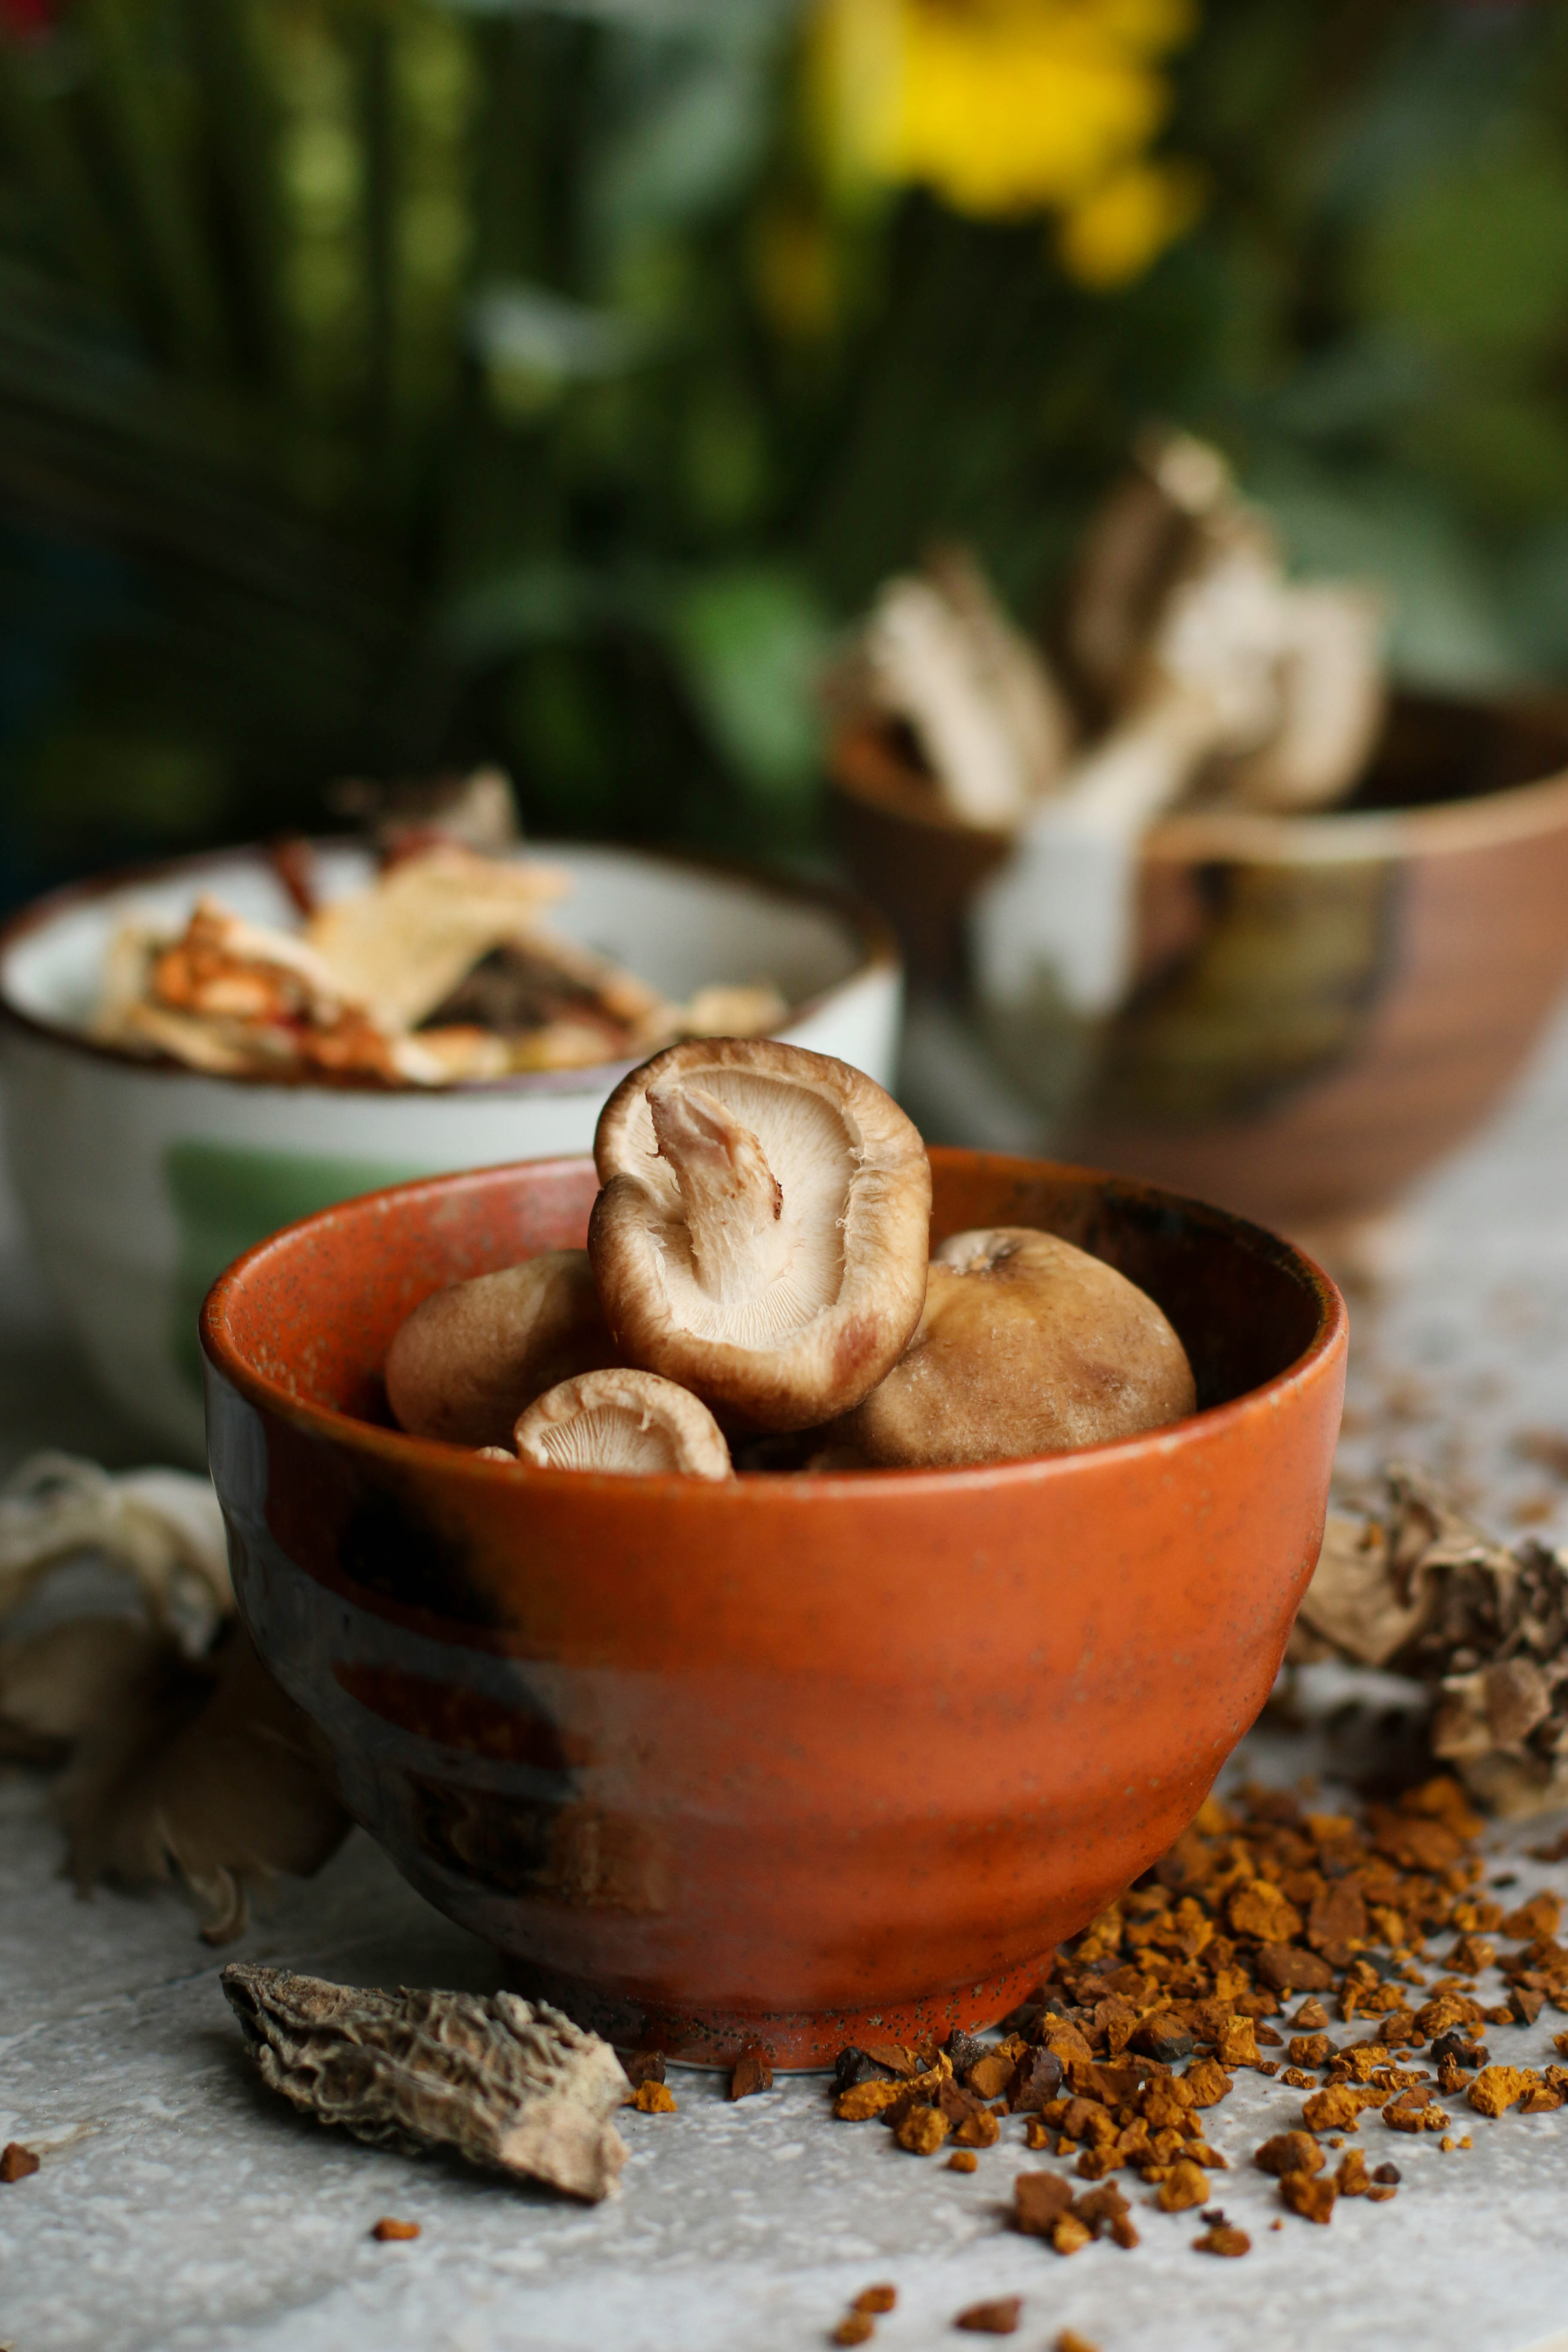 ceramic-bowls-of-fresh-mushrooms-on-table-with-plants-in-background